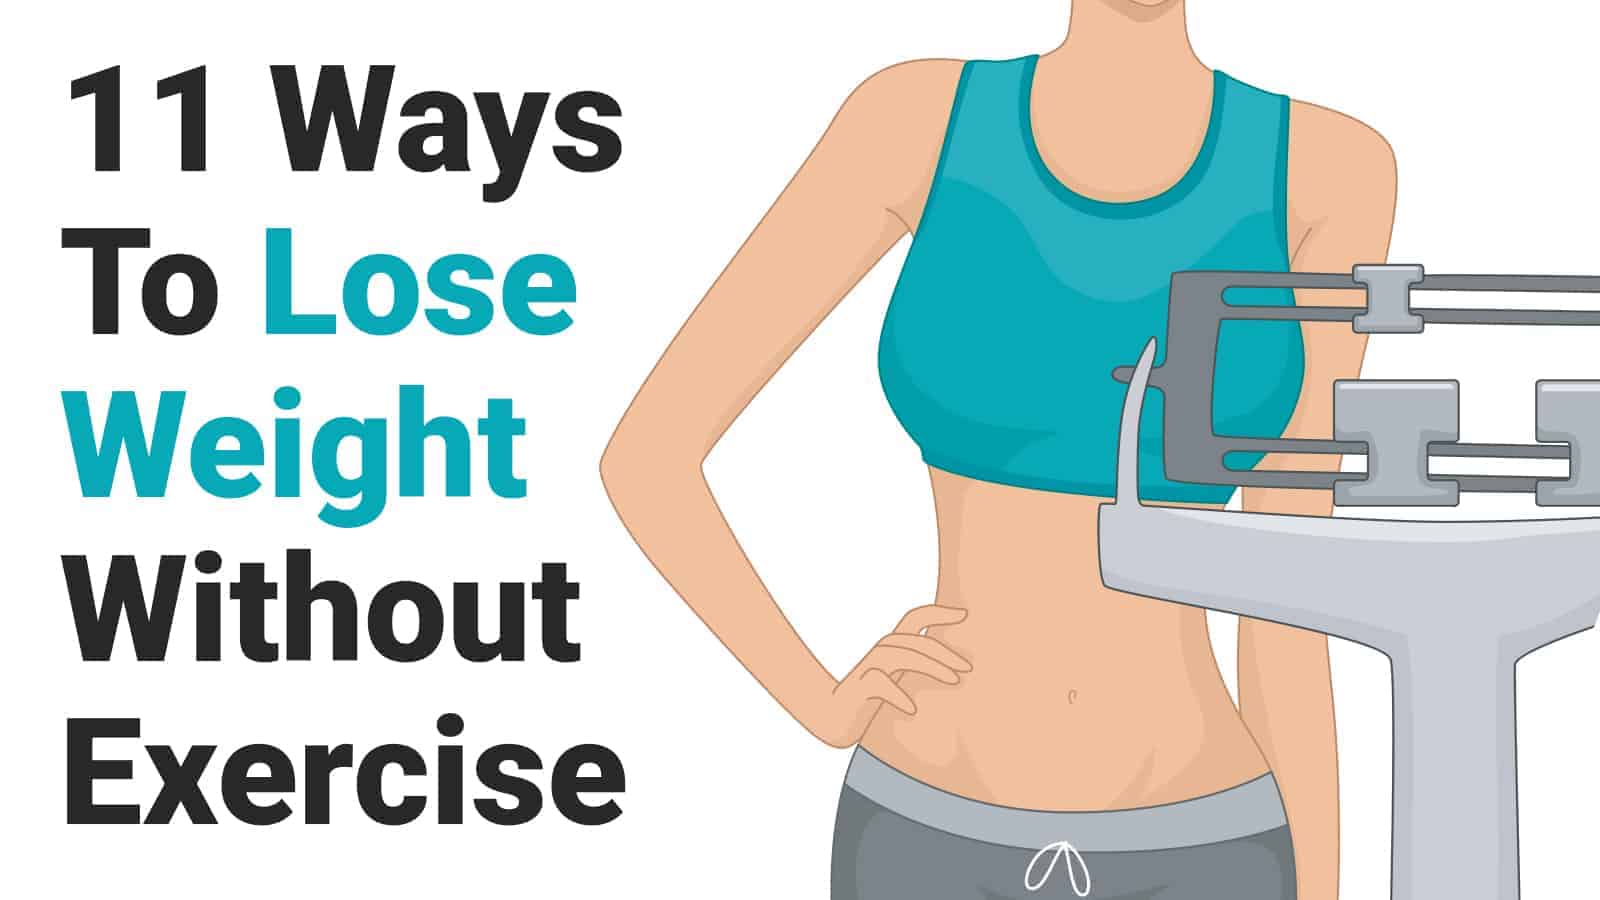 11 Ways To Lose Weight Without Exercise